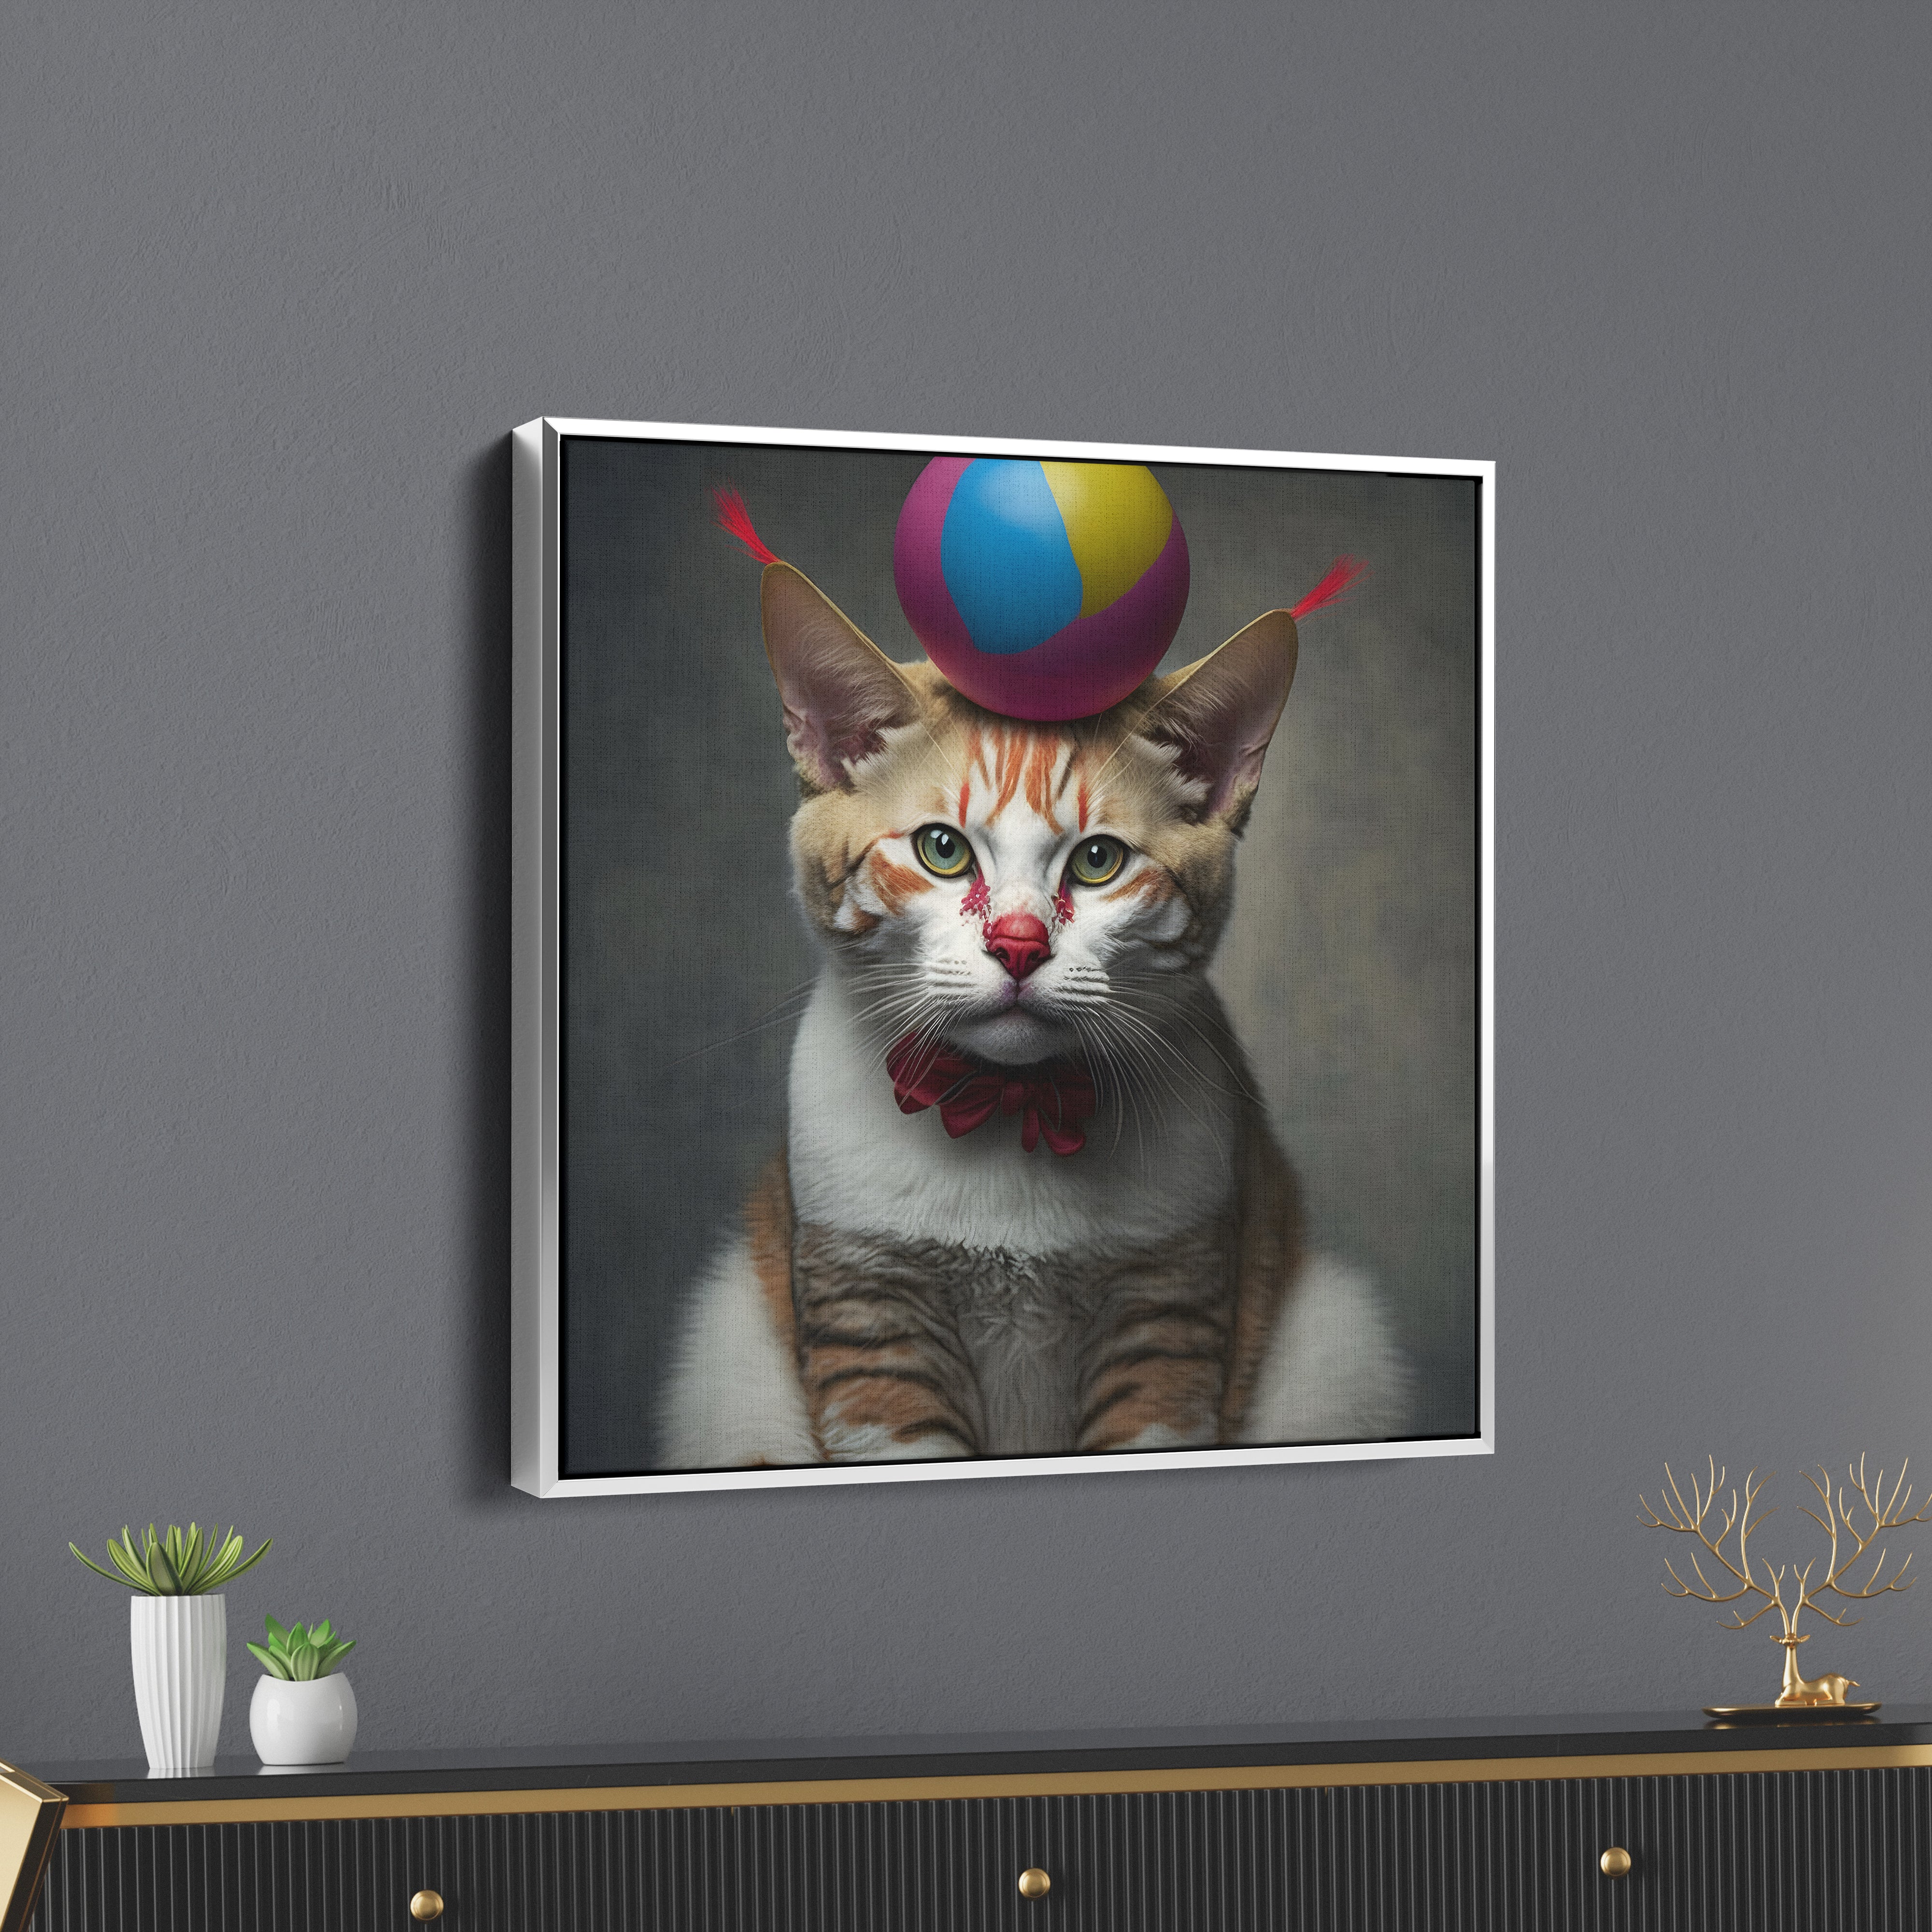 Cat Holding Boll On Head Canvas Wall Painting